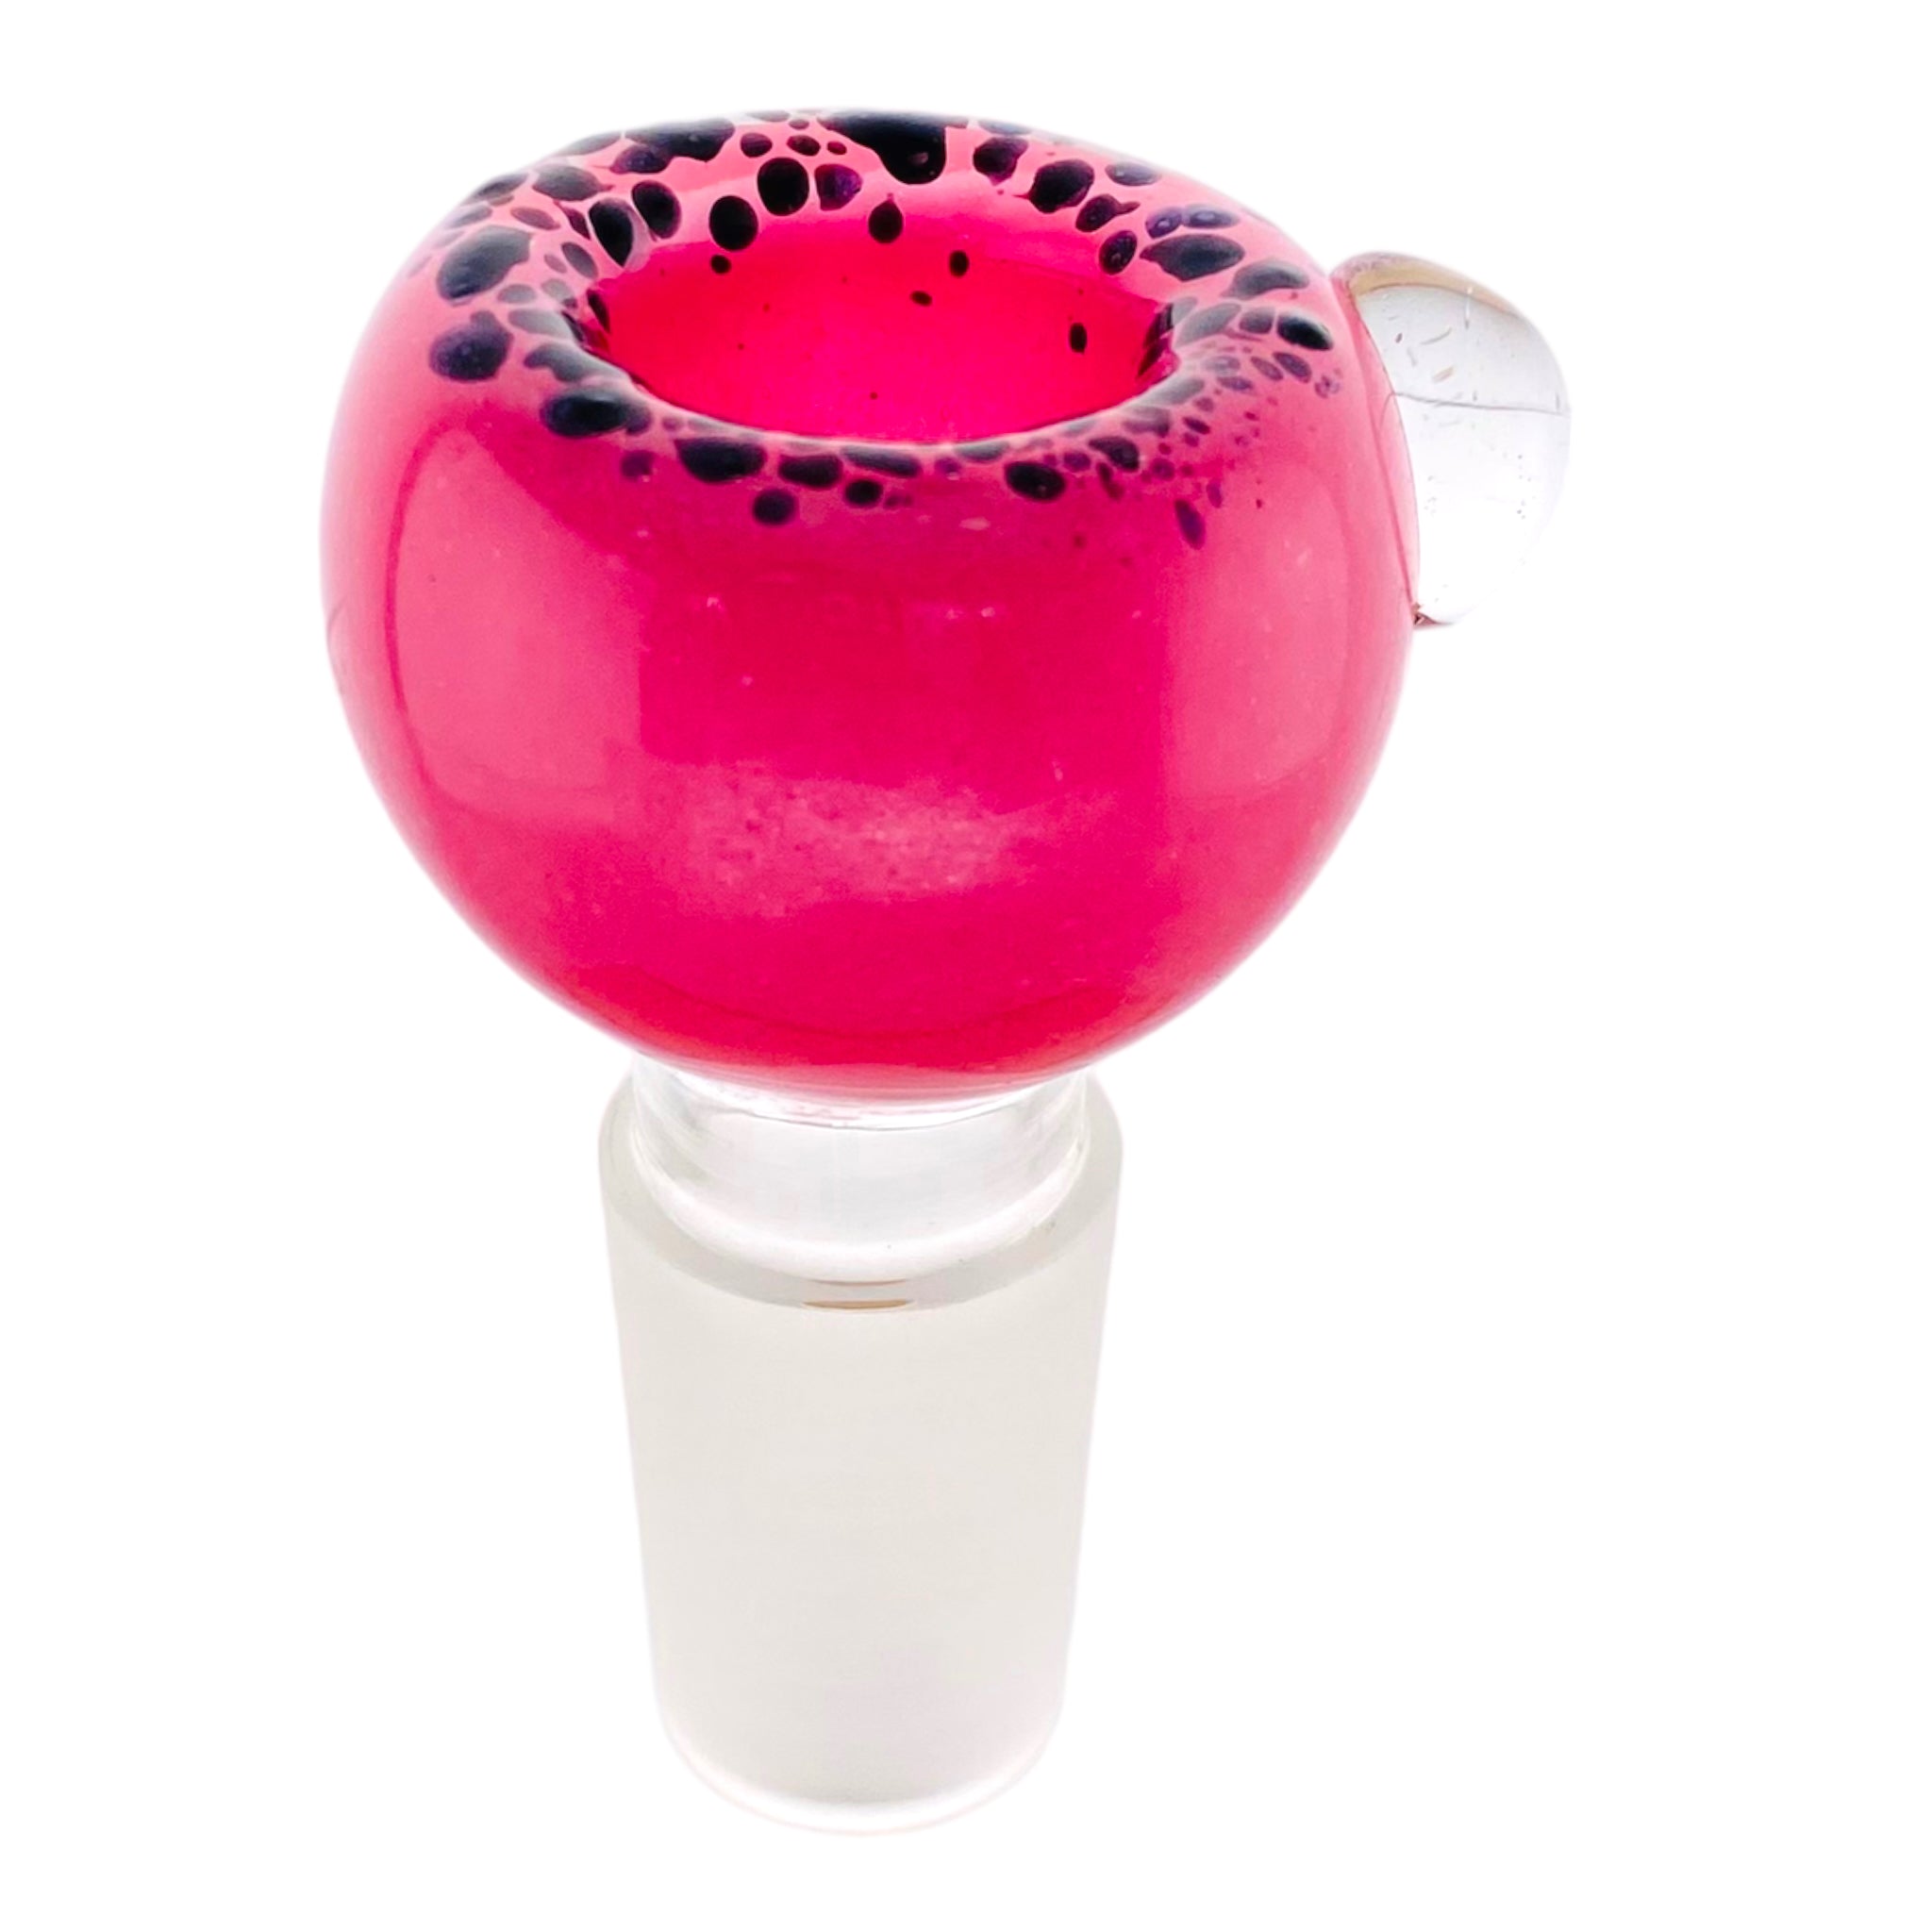 18mm Flower Bowl - Bubble With Frosted Rim Bong Bowl Piece - Pink